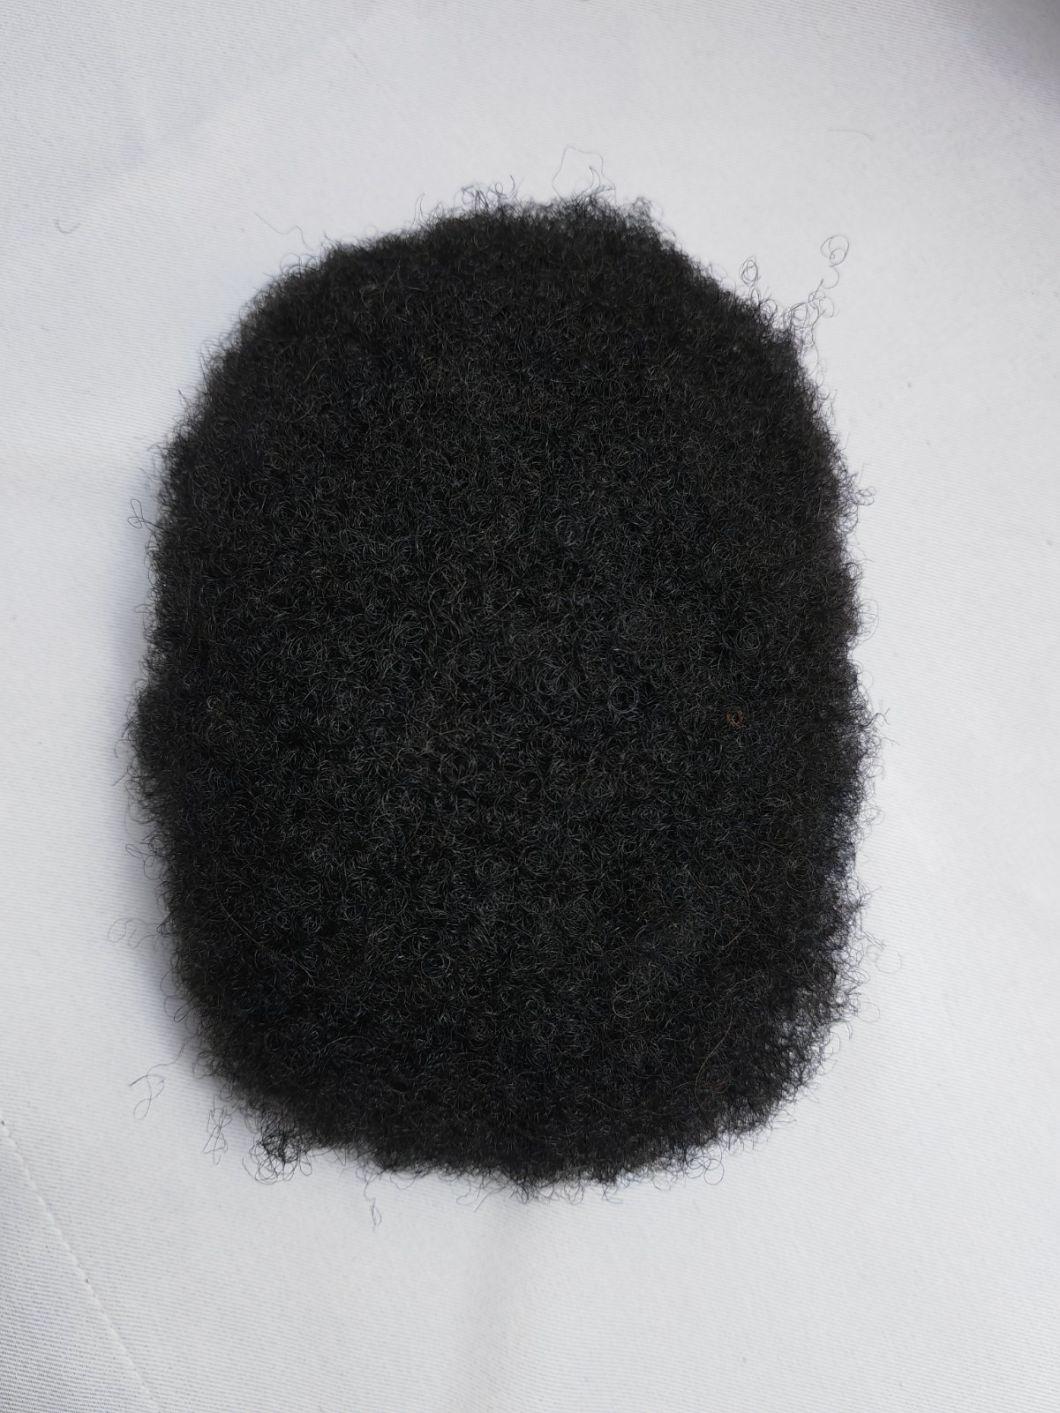 2022 Best Custom Made Comfortable Fine Mono Base Human Hair Toupee Made of Remy Human Hair